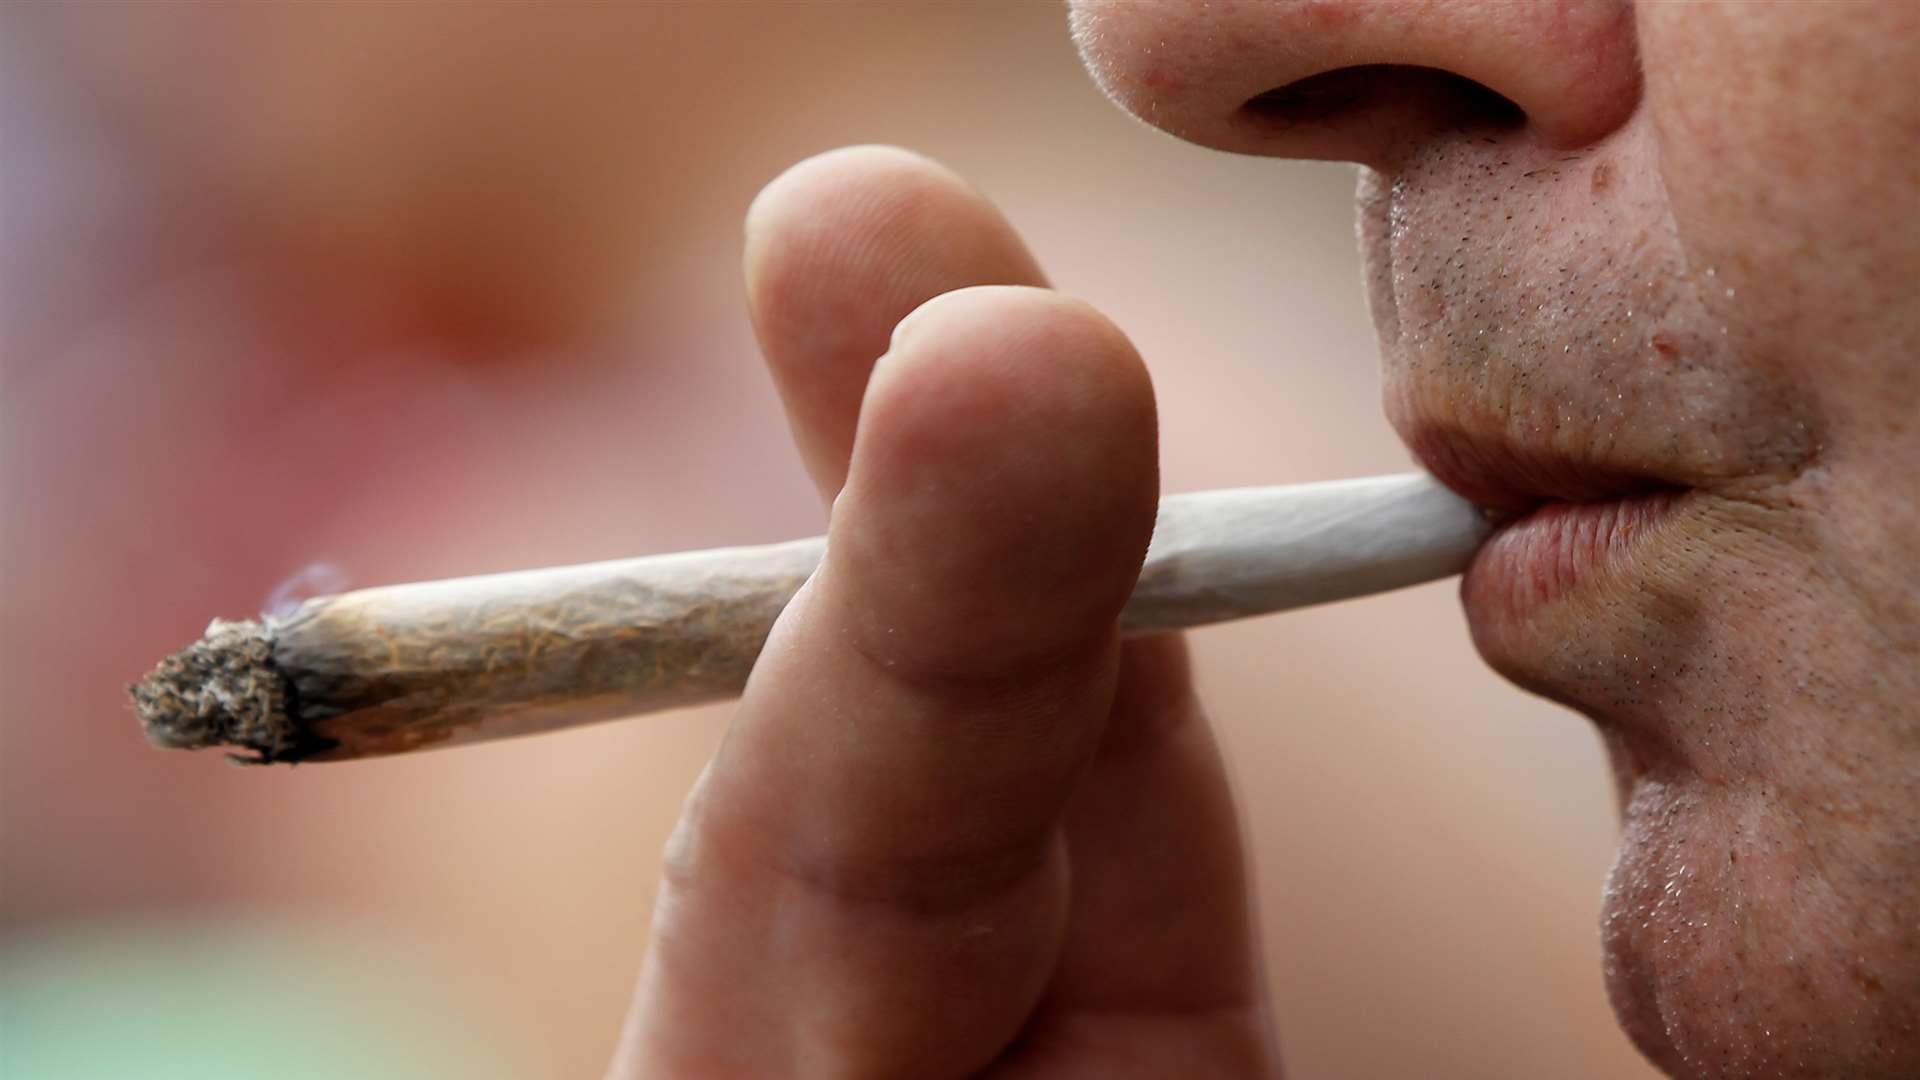 Police believed they could smell cannabis in the car. Picture: Sean Gallup/Getty Images